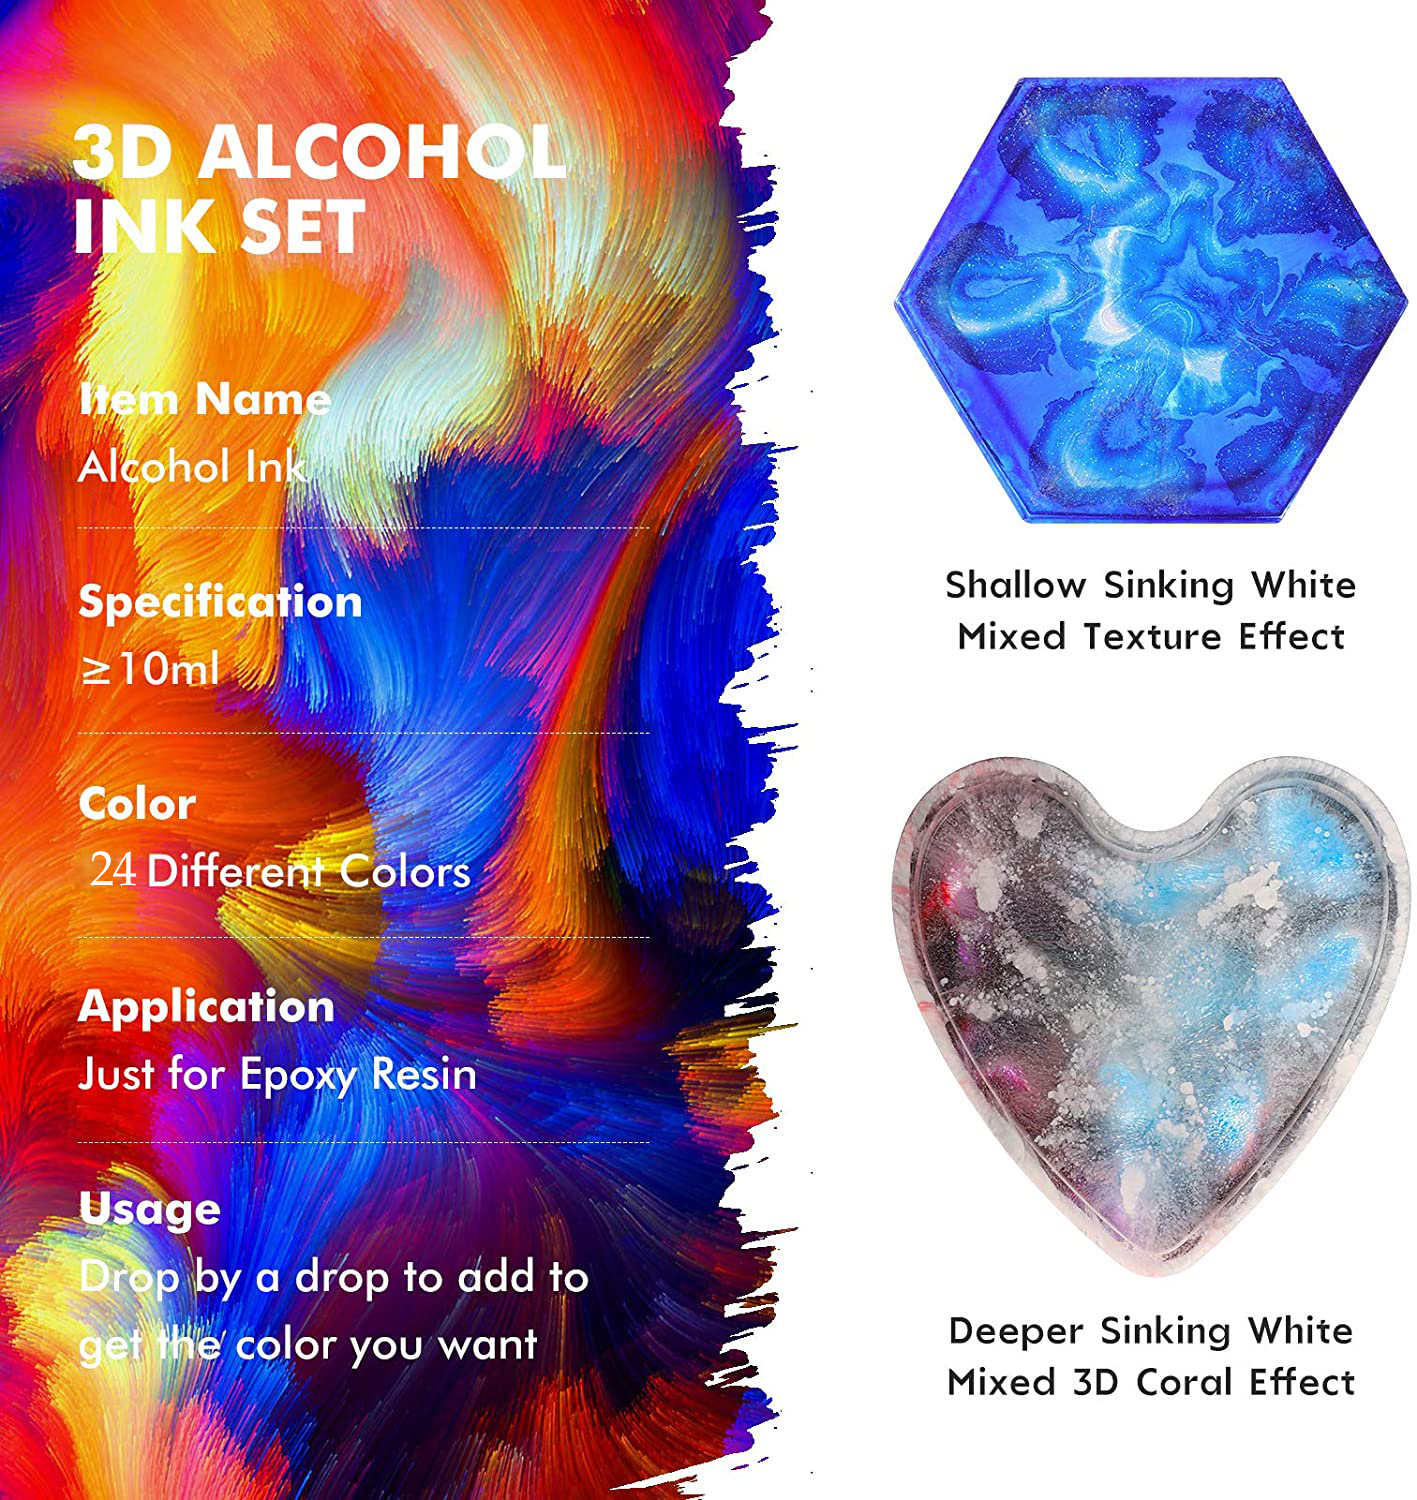 Alcohol Ink Set - 24 Highly Saturated Alcohol Inks - Acid-Free, Fast-Drying  and Permanent Alcohol-Based